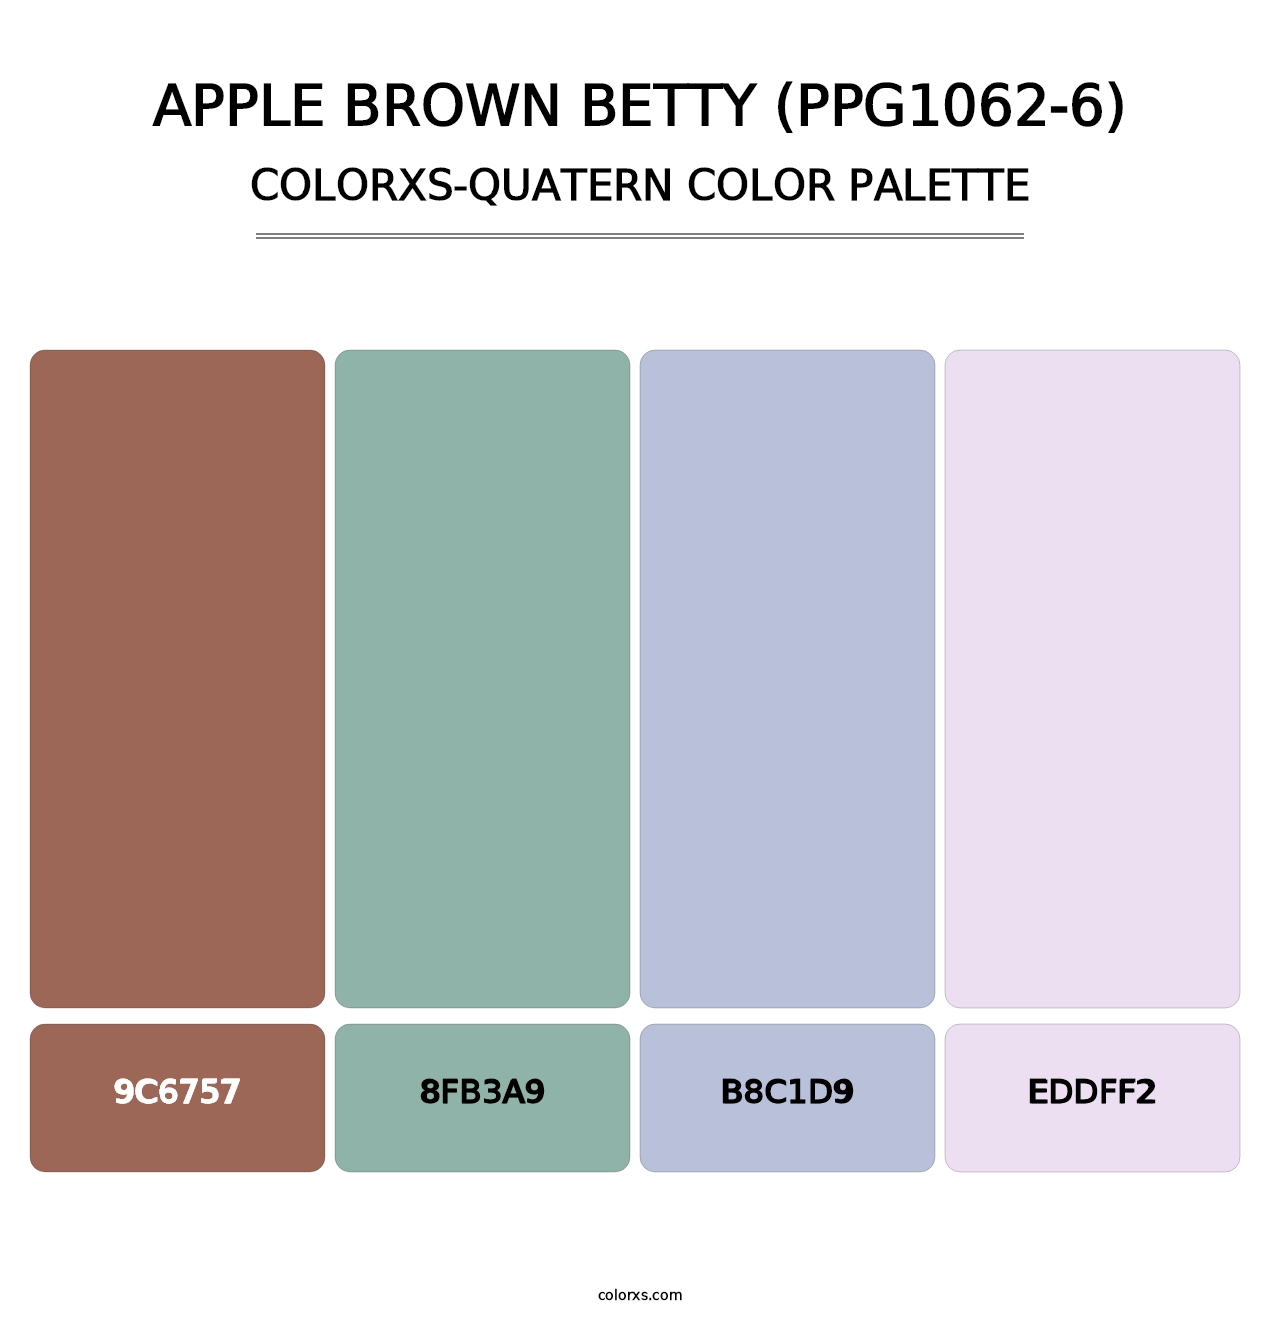 Apple Brown Betty (PPG1062-6) - Colorxs Quatern Palette